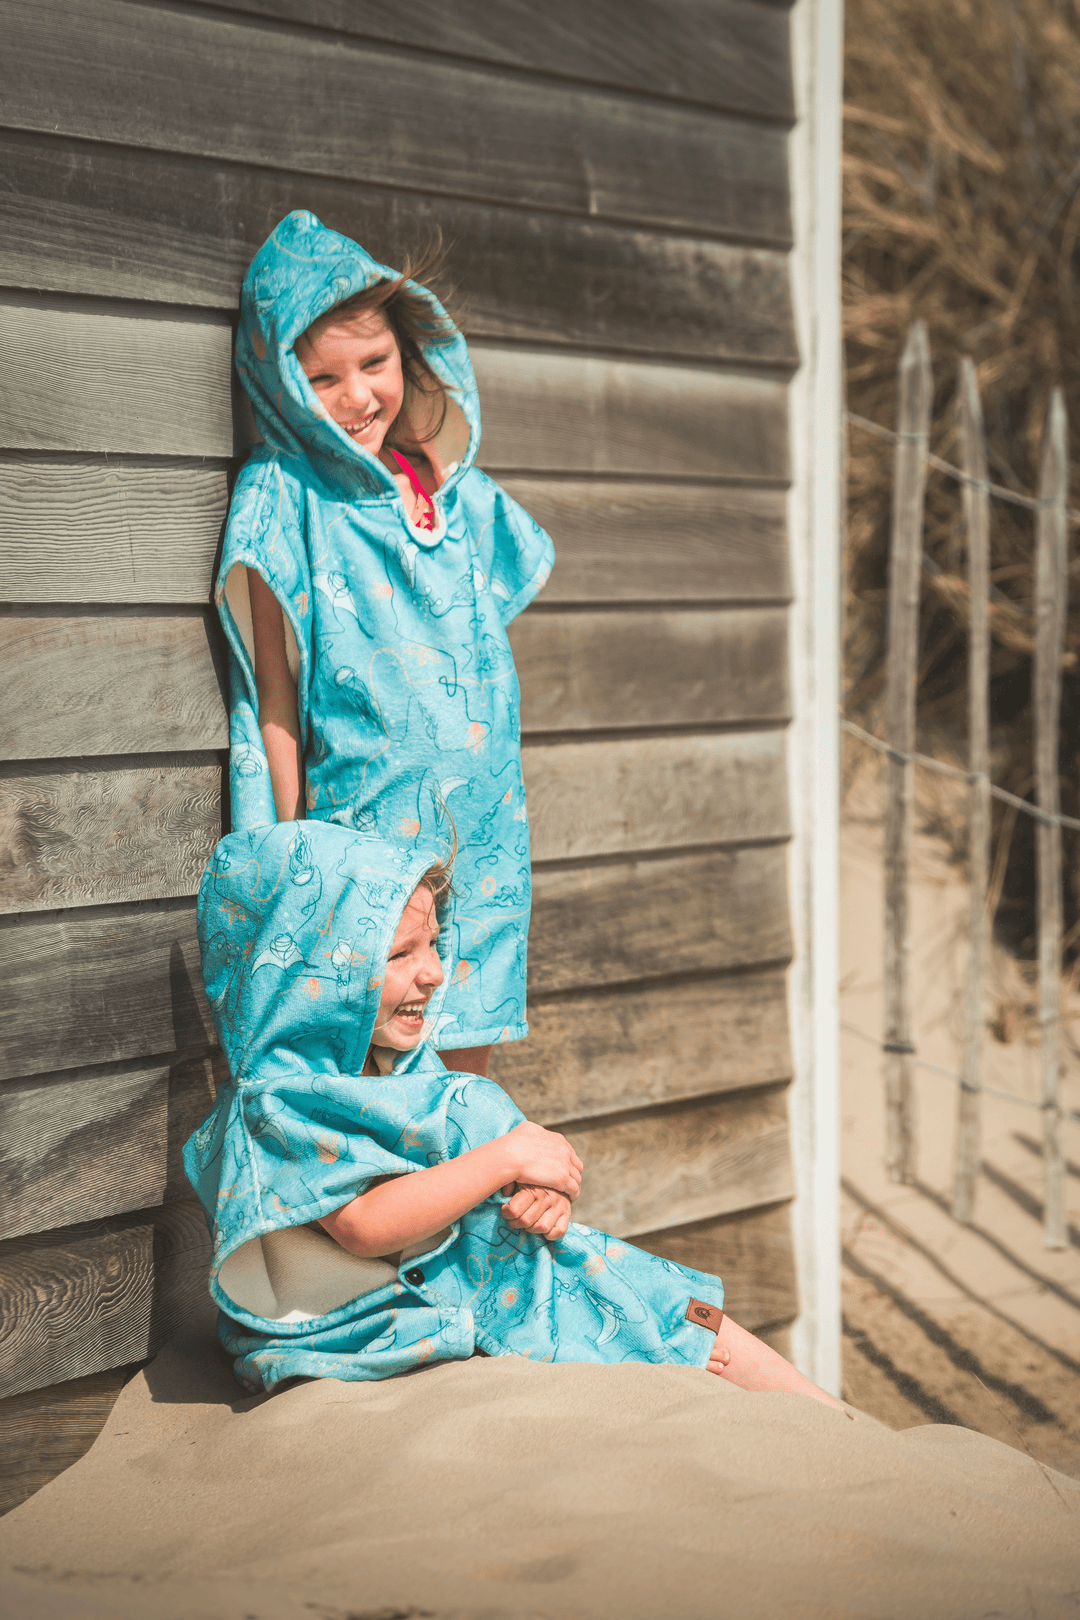 The Kids surf poncho is a must-have for the youngest beach lovers. No more struggle to get them changed, no more worries about them getting cold after a swim. They feel like a fish in the ocean with our supersoft changing towel.